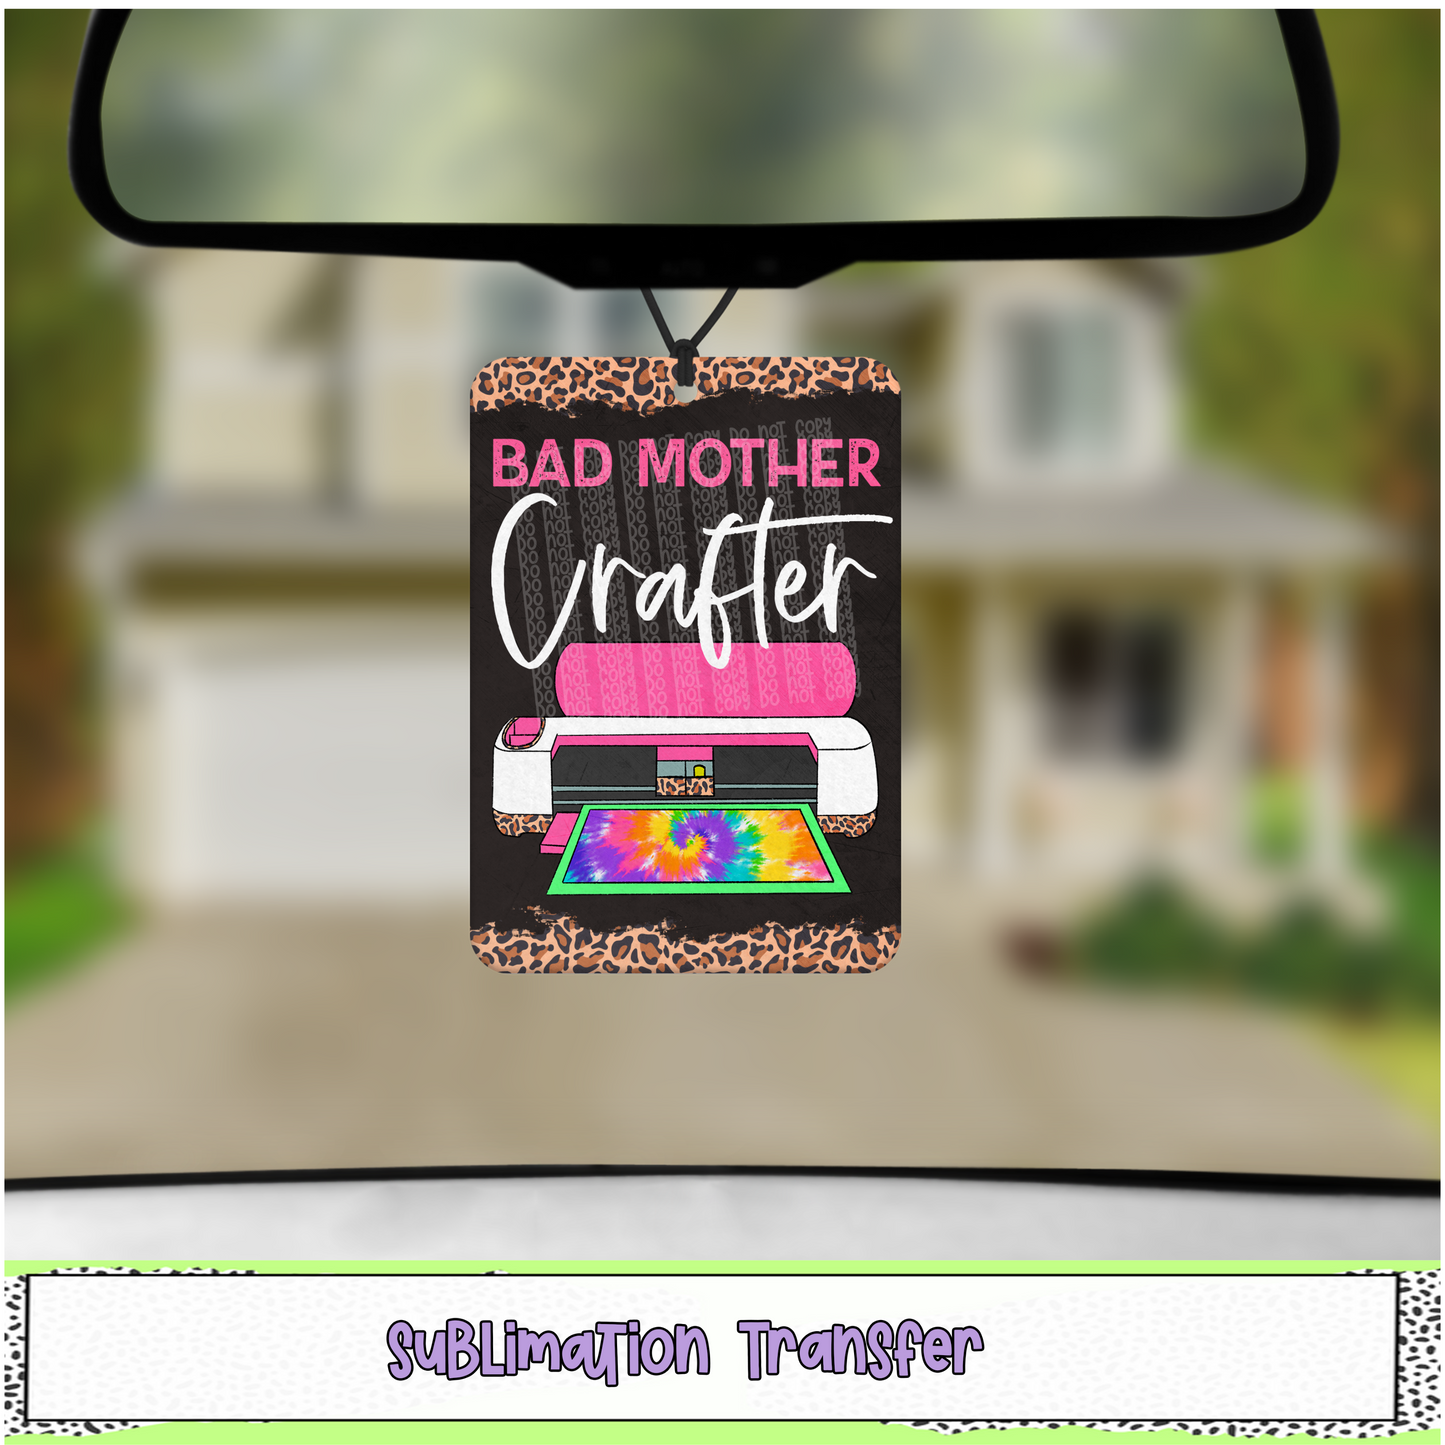 Bad Mother Crafter - Air Freshener Sublimation Transfer - RTS